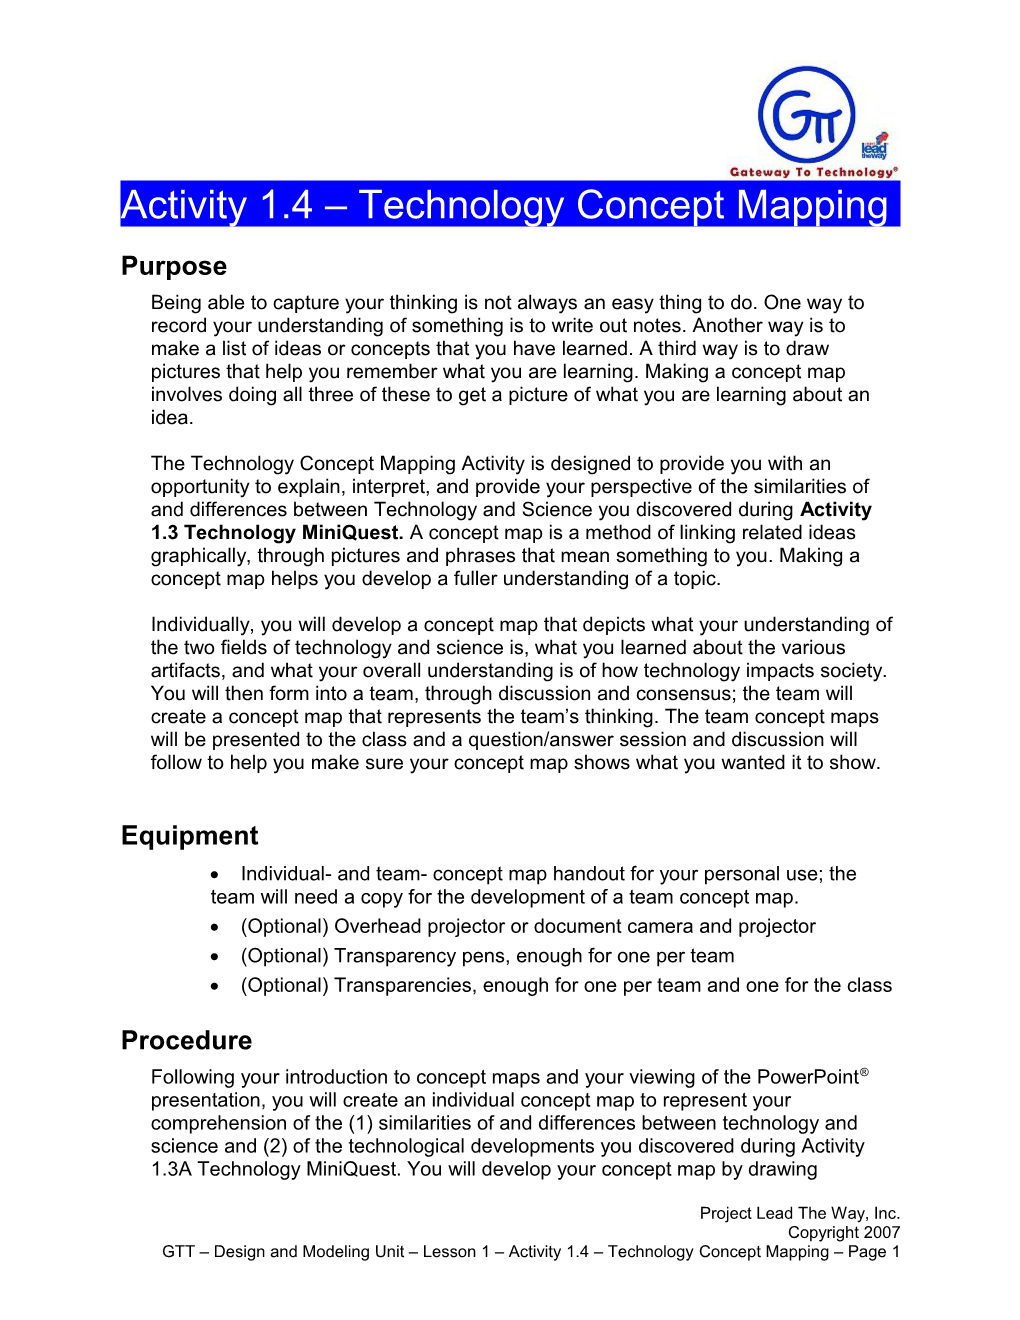 Activity 1.4 - Technology Concept Mapping